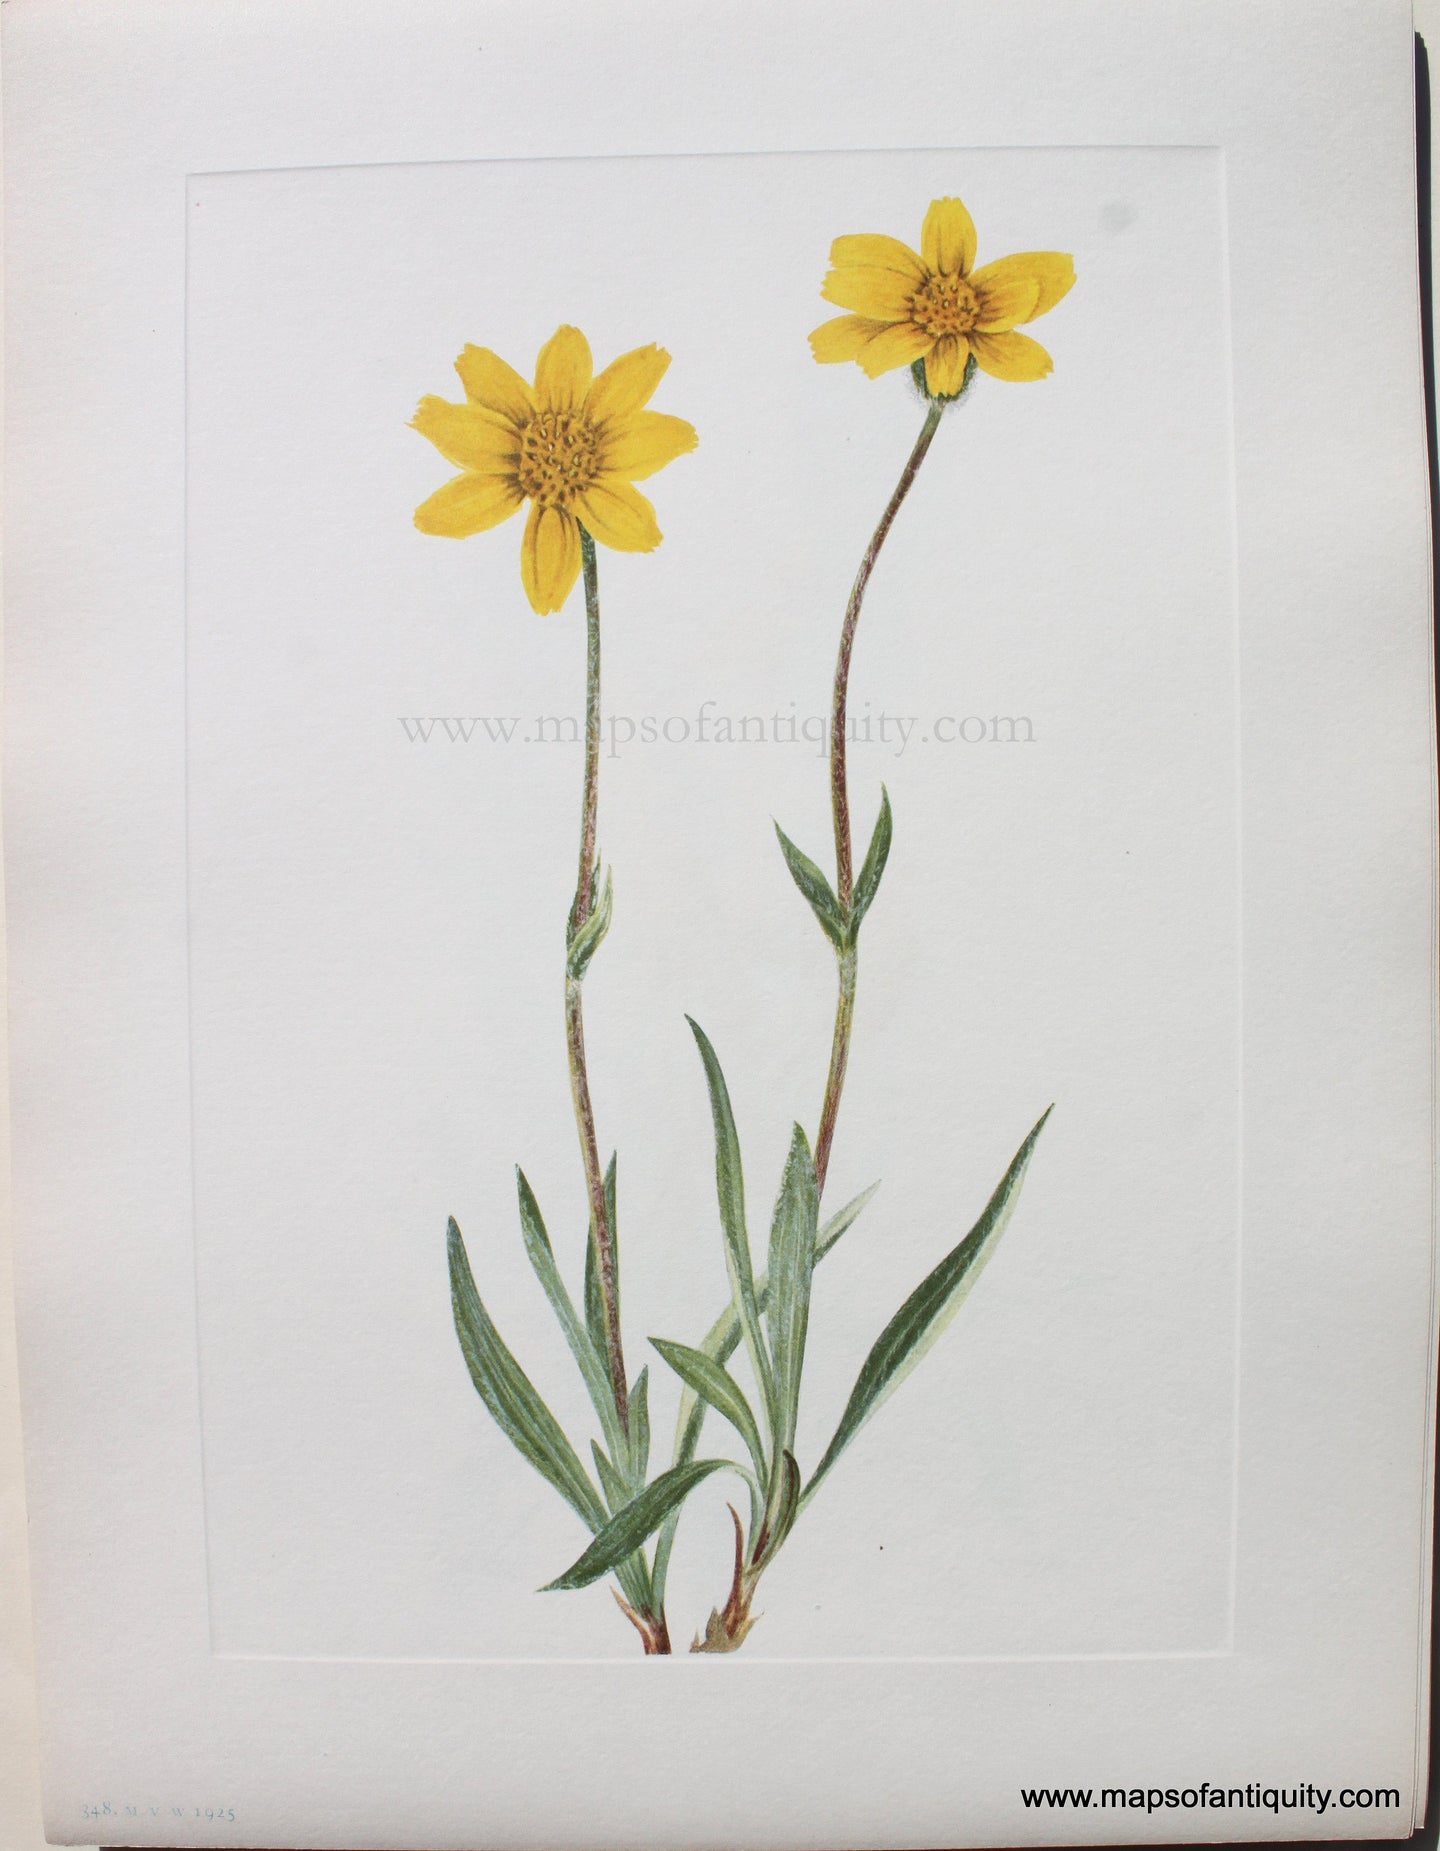 1925 - Woolly Arnica - Antique Print